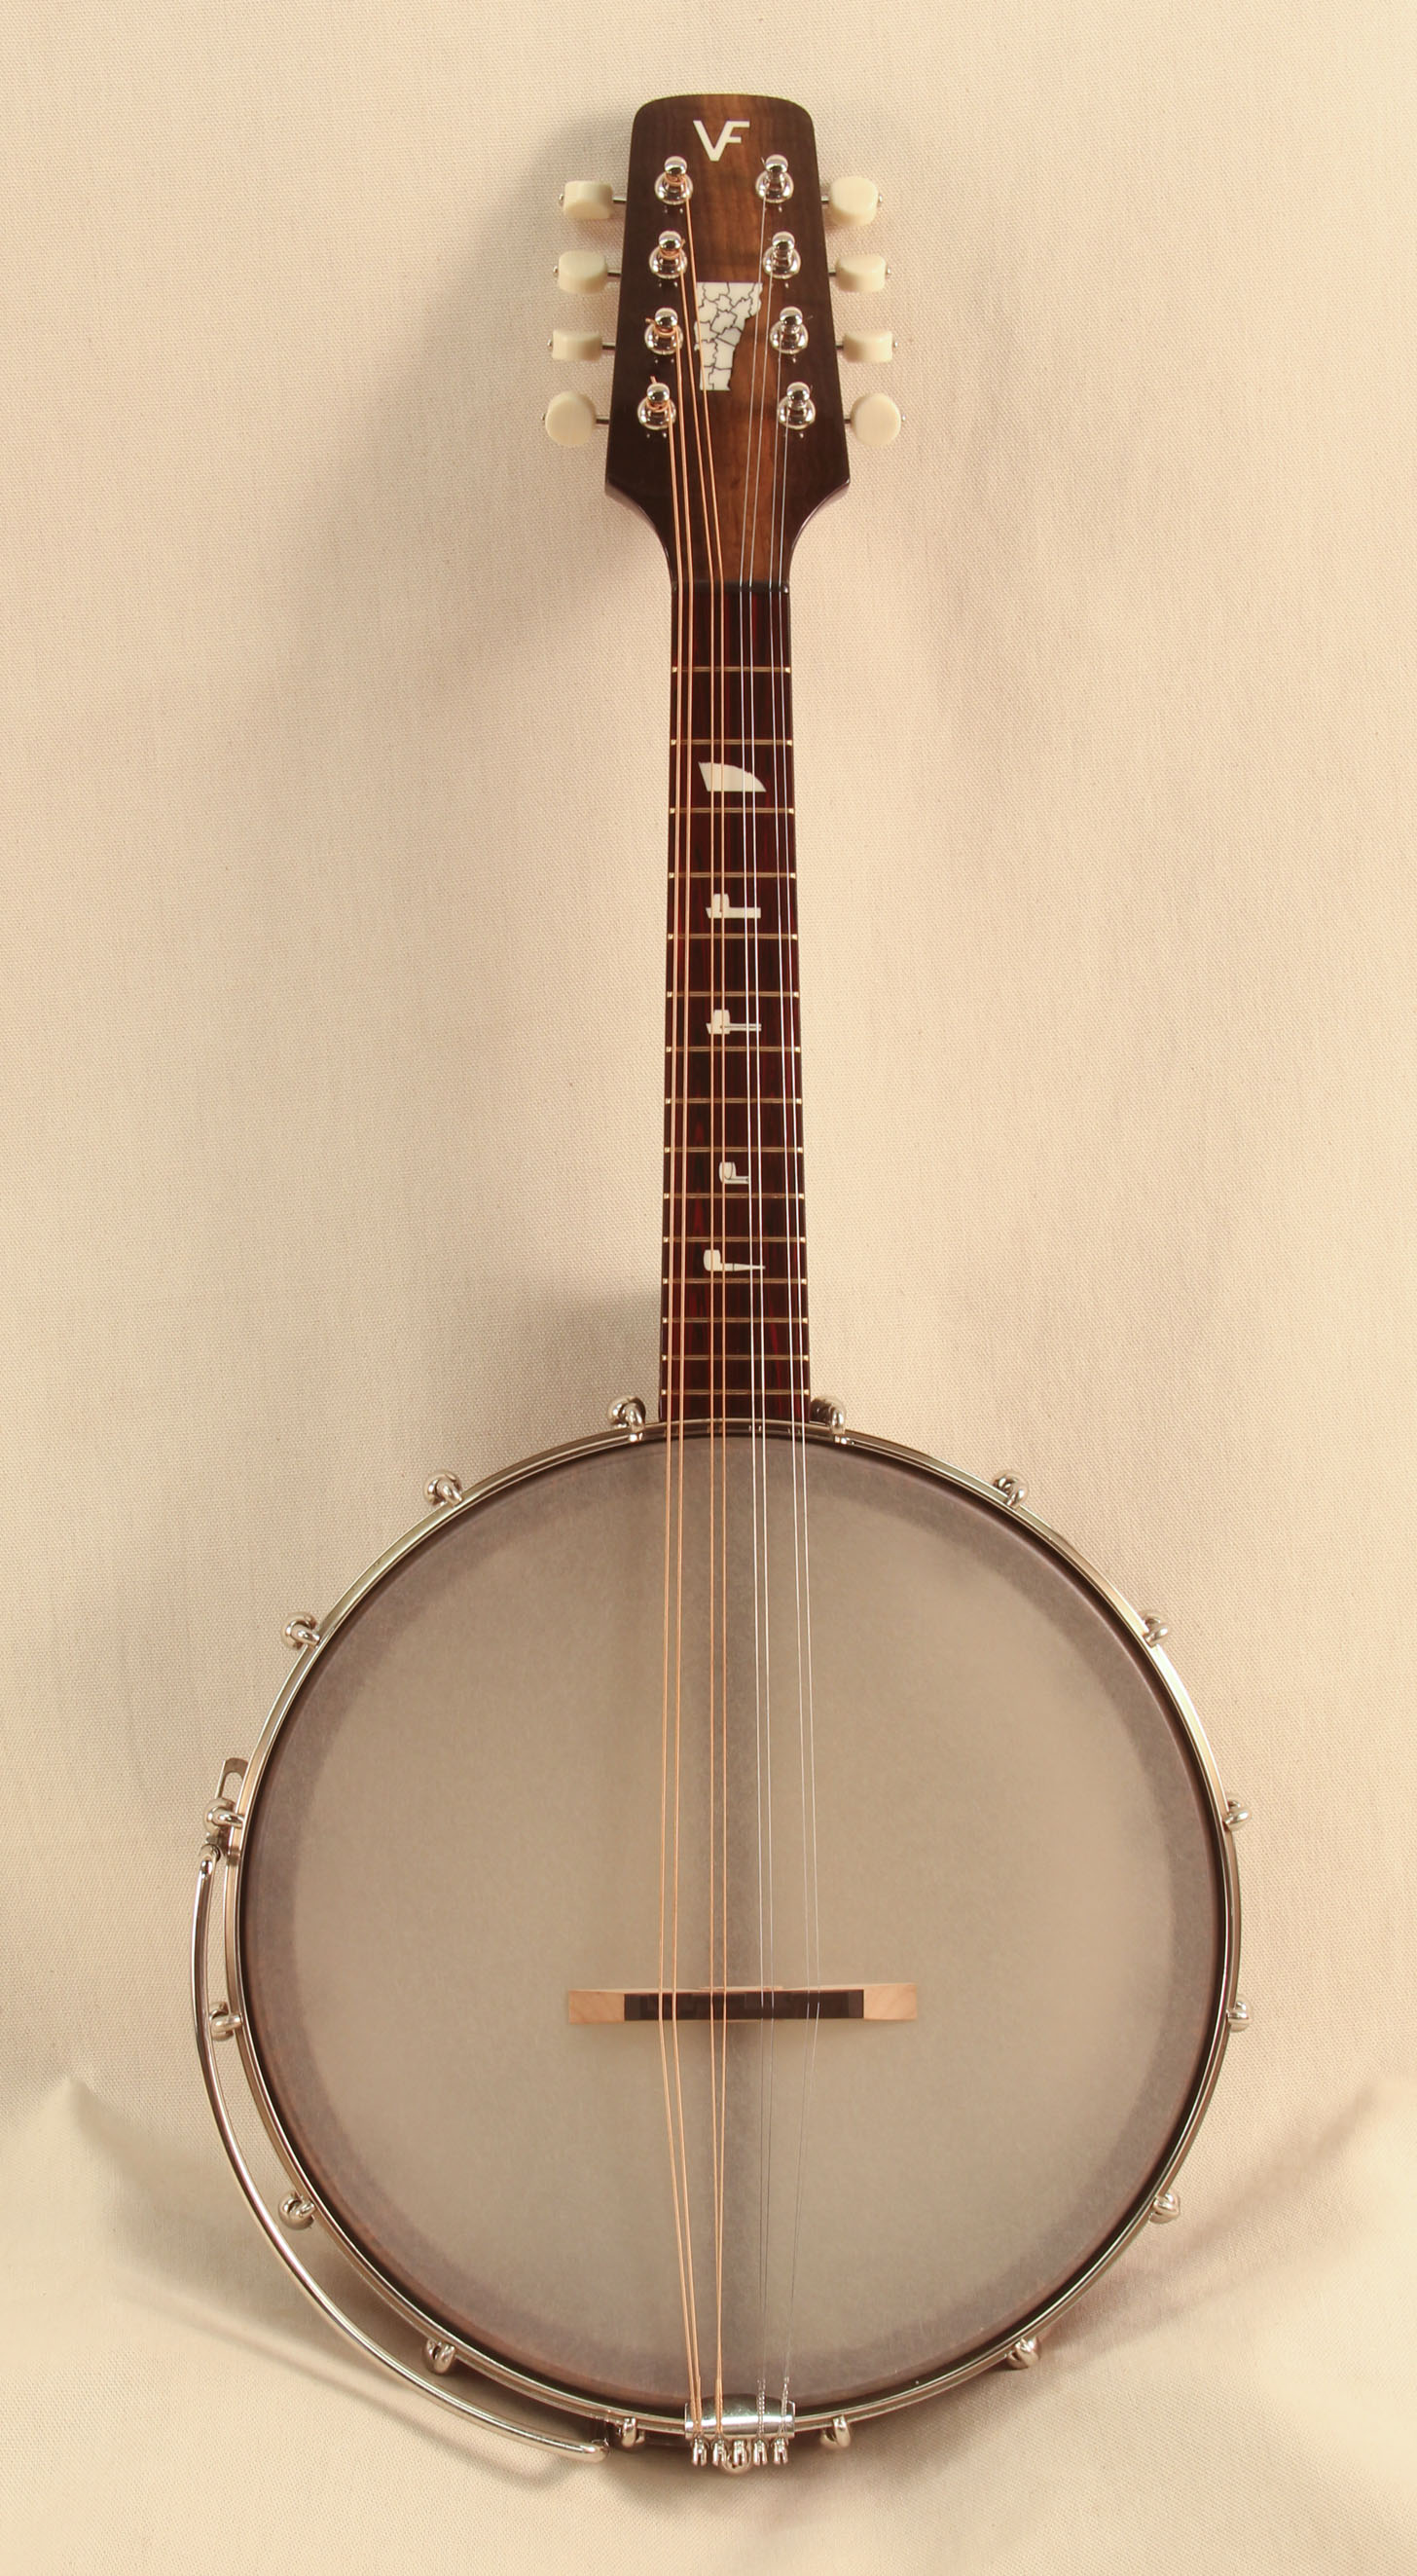 Finding Yourself A Great Custom Banjo Makers - Somnusthera